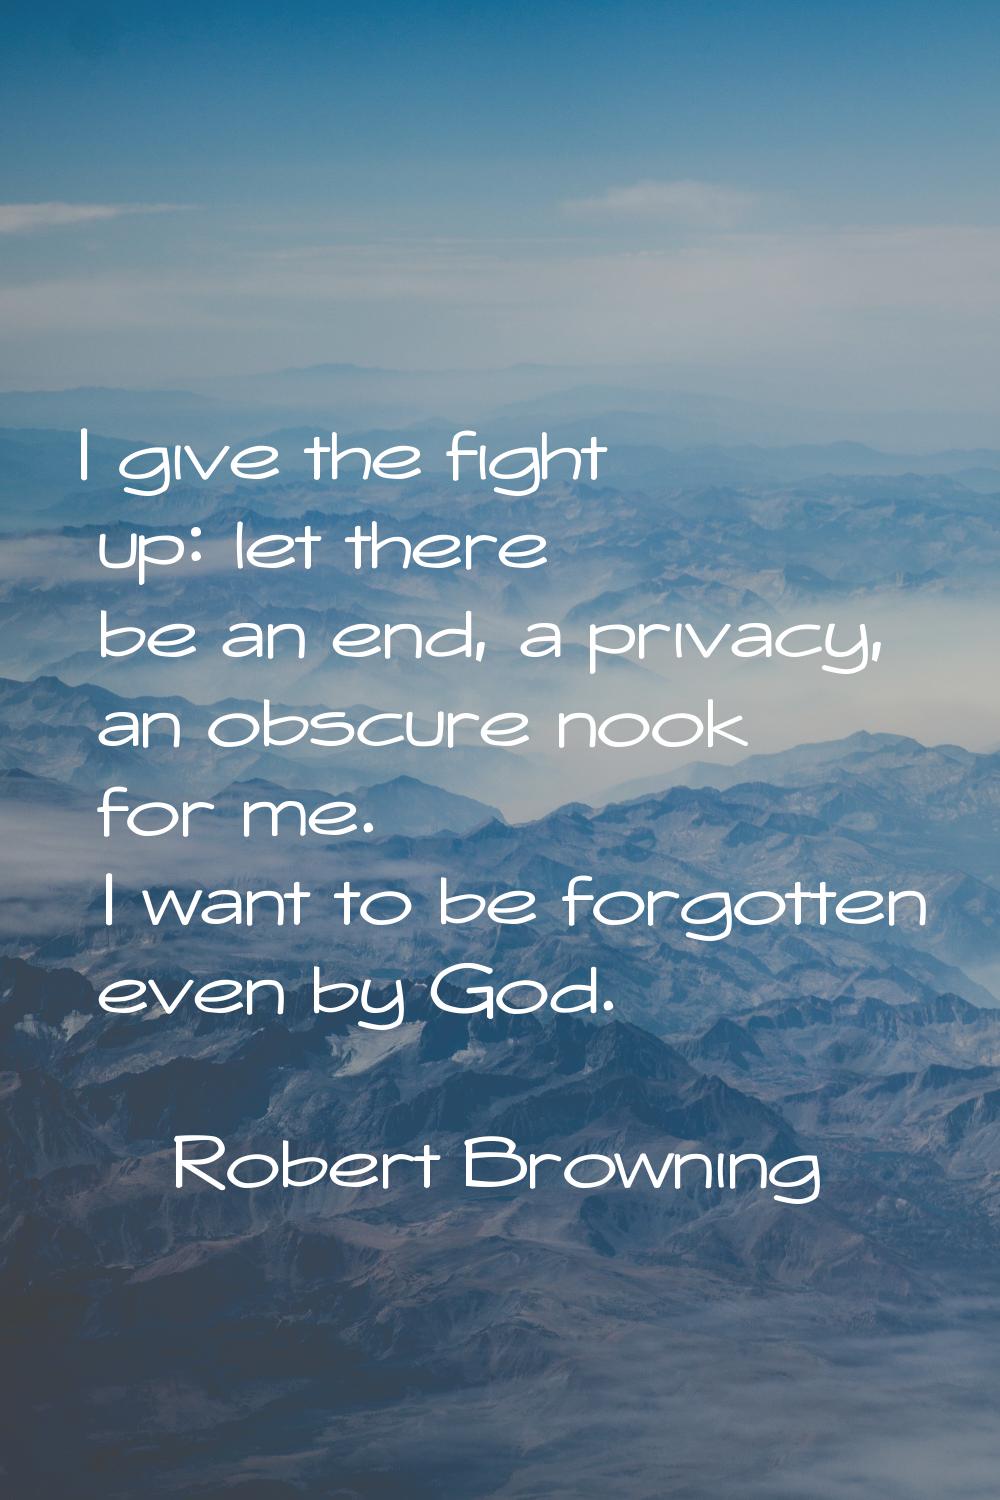 I give the fight up: let there be an end, a privacy, an obscure nook for me. I want to be forgotten